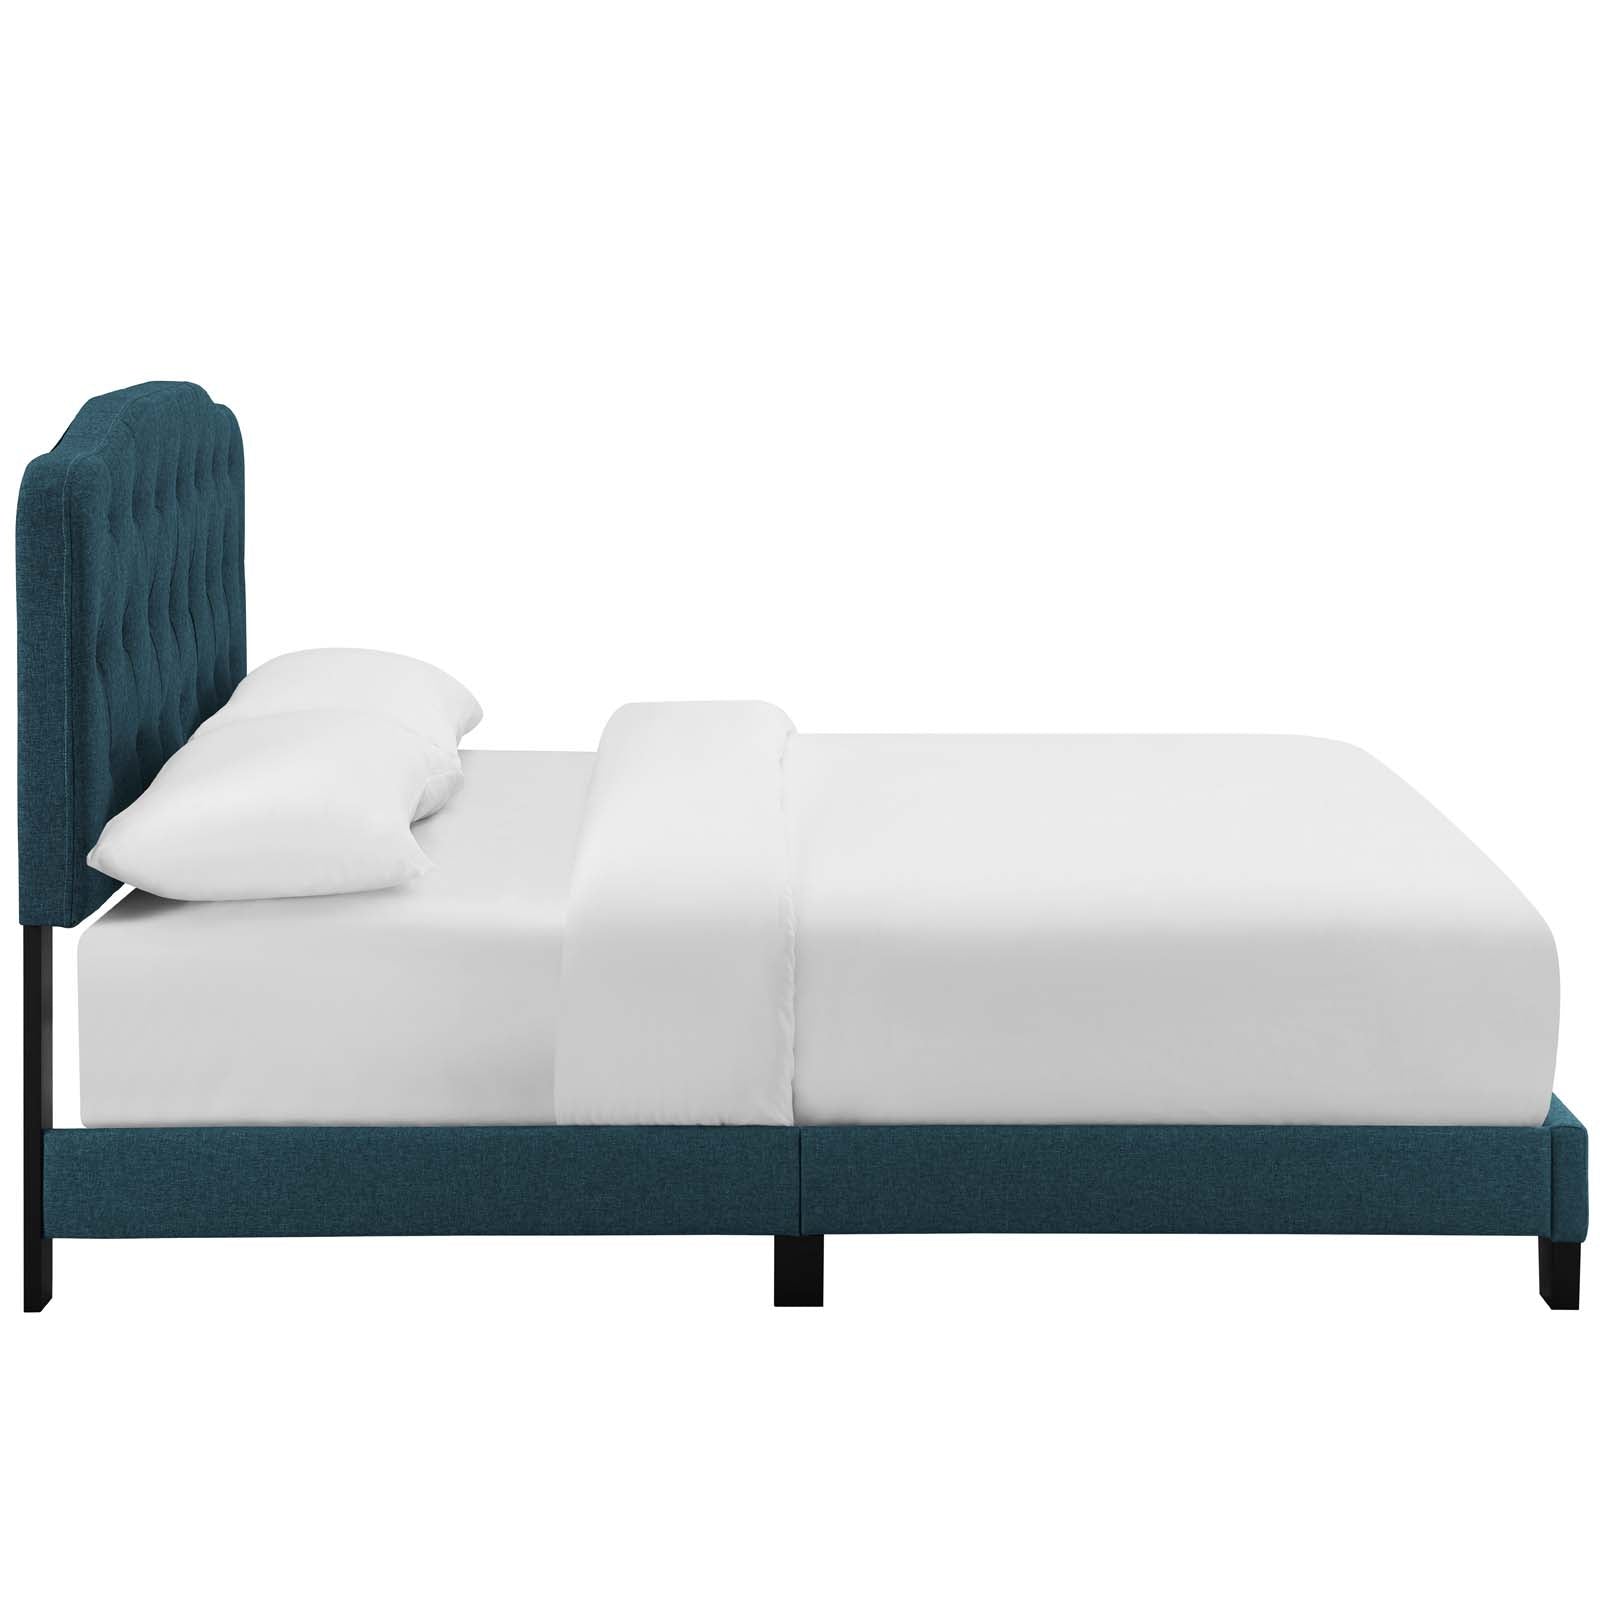 Modway Beds - Amelia Queen Upholstered Fabric Bed Azure